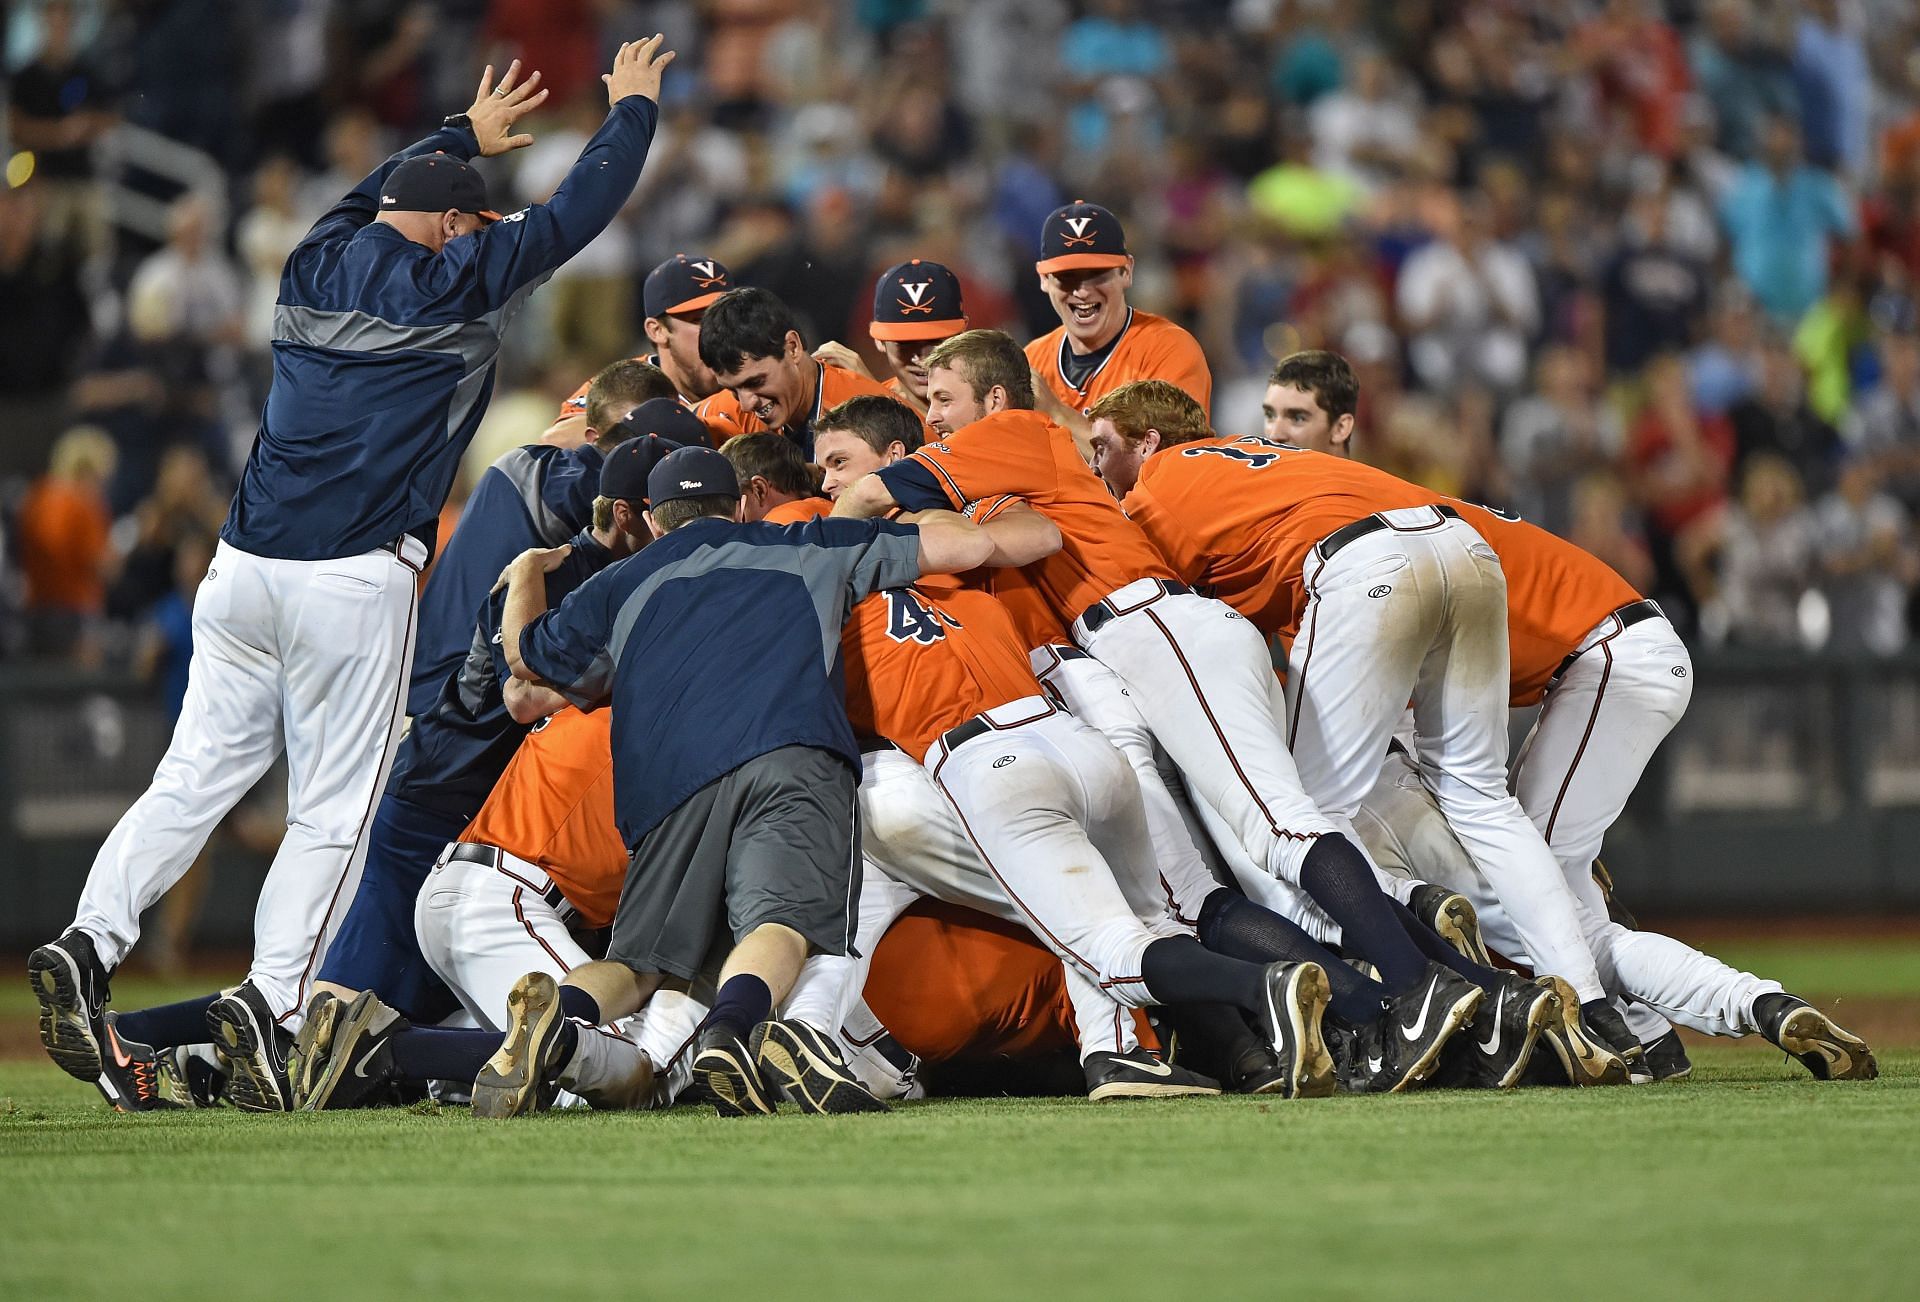 UVA Baseball 2023: Previewing The Lineup - Streaking The Lawn